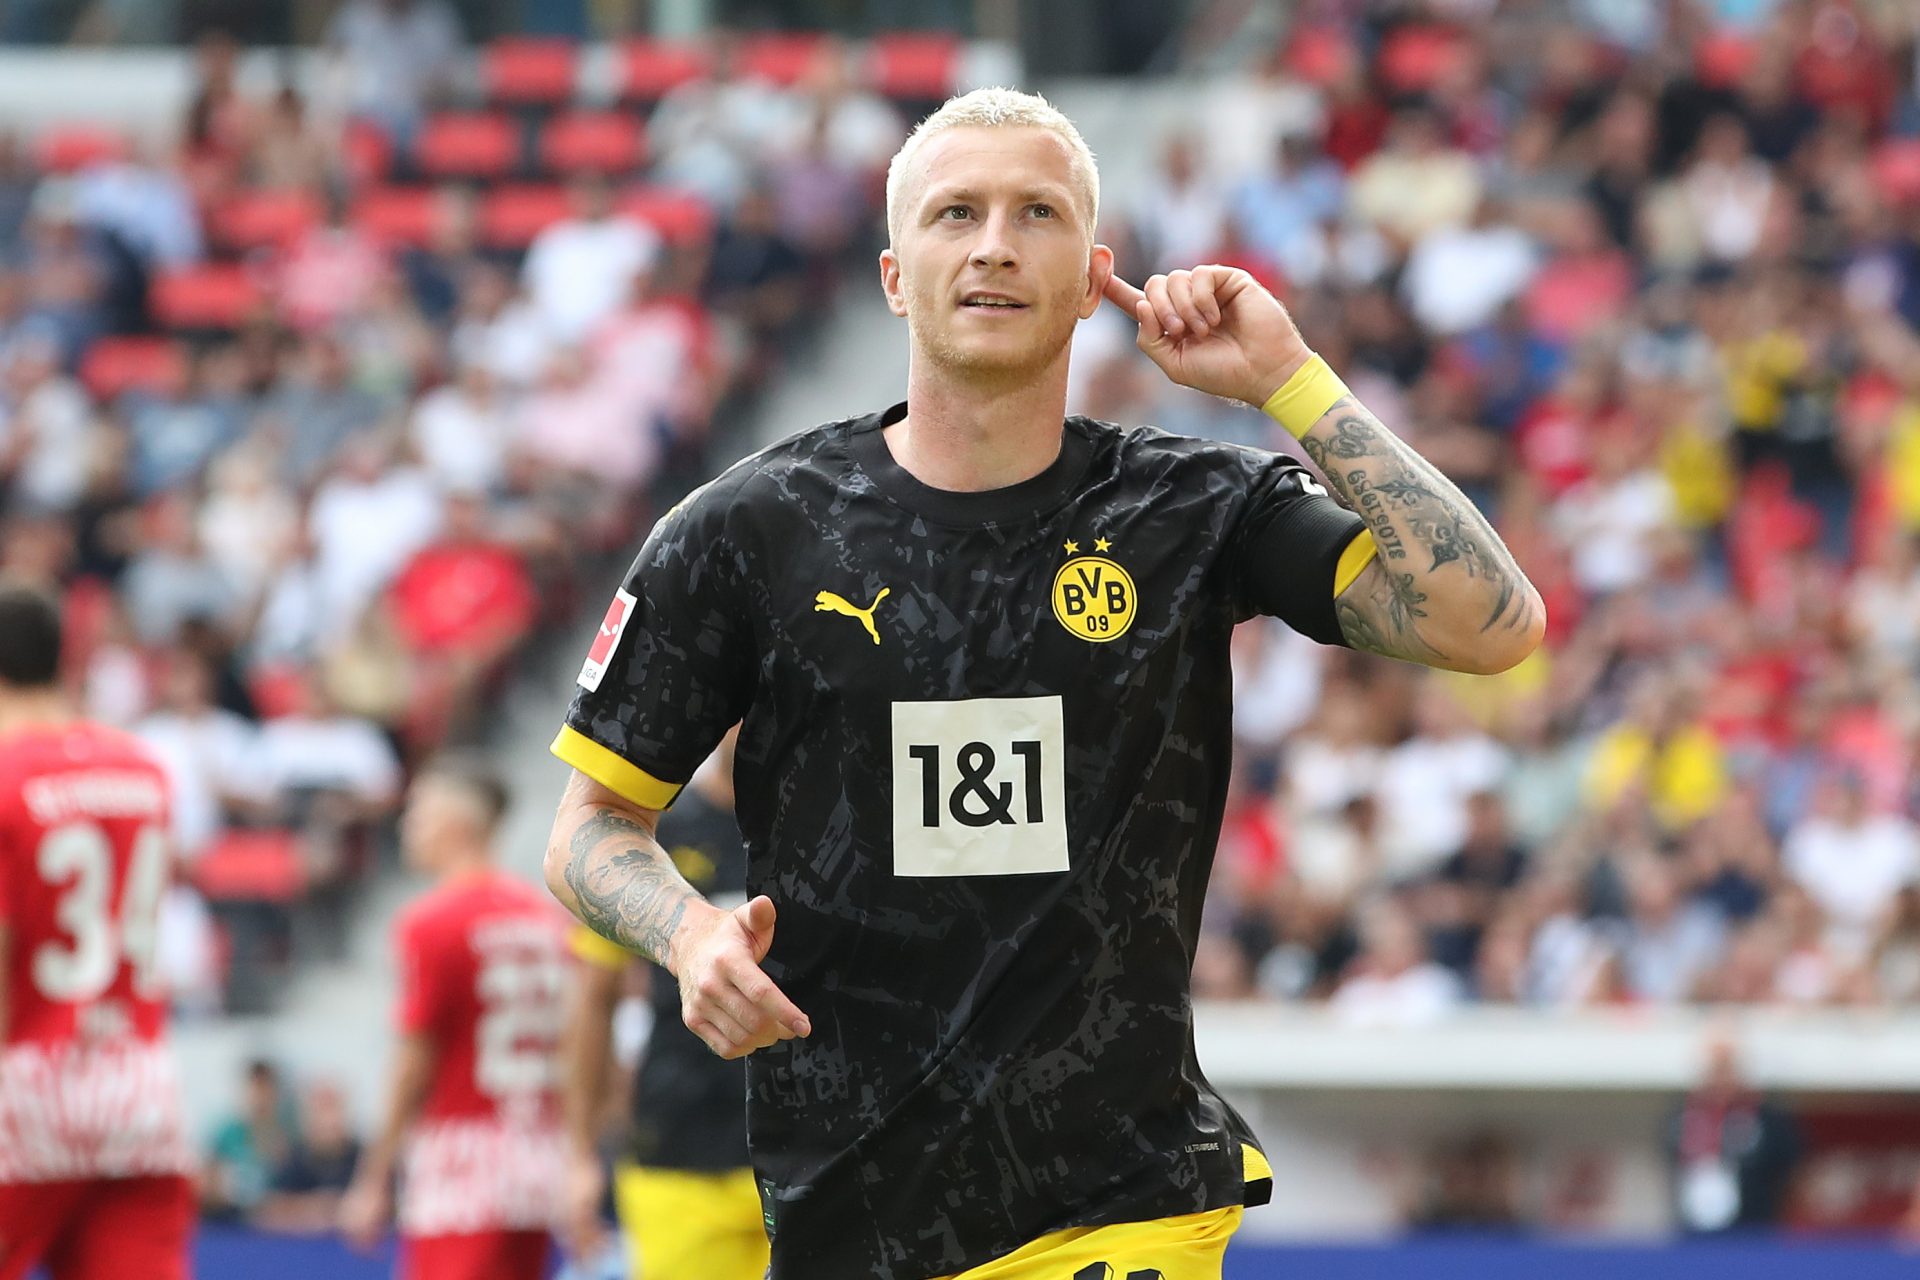 A date with destiny! Marco Reus will play his final game for Dortmund in the Champions League Final